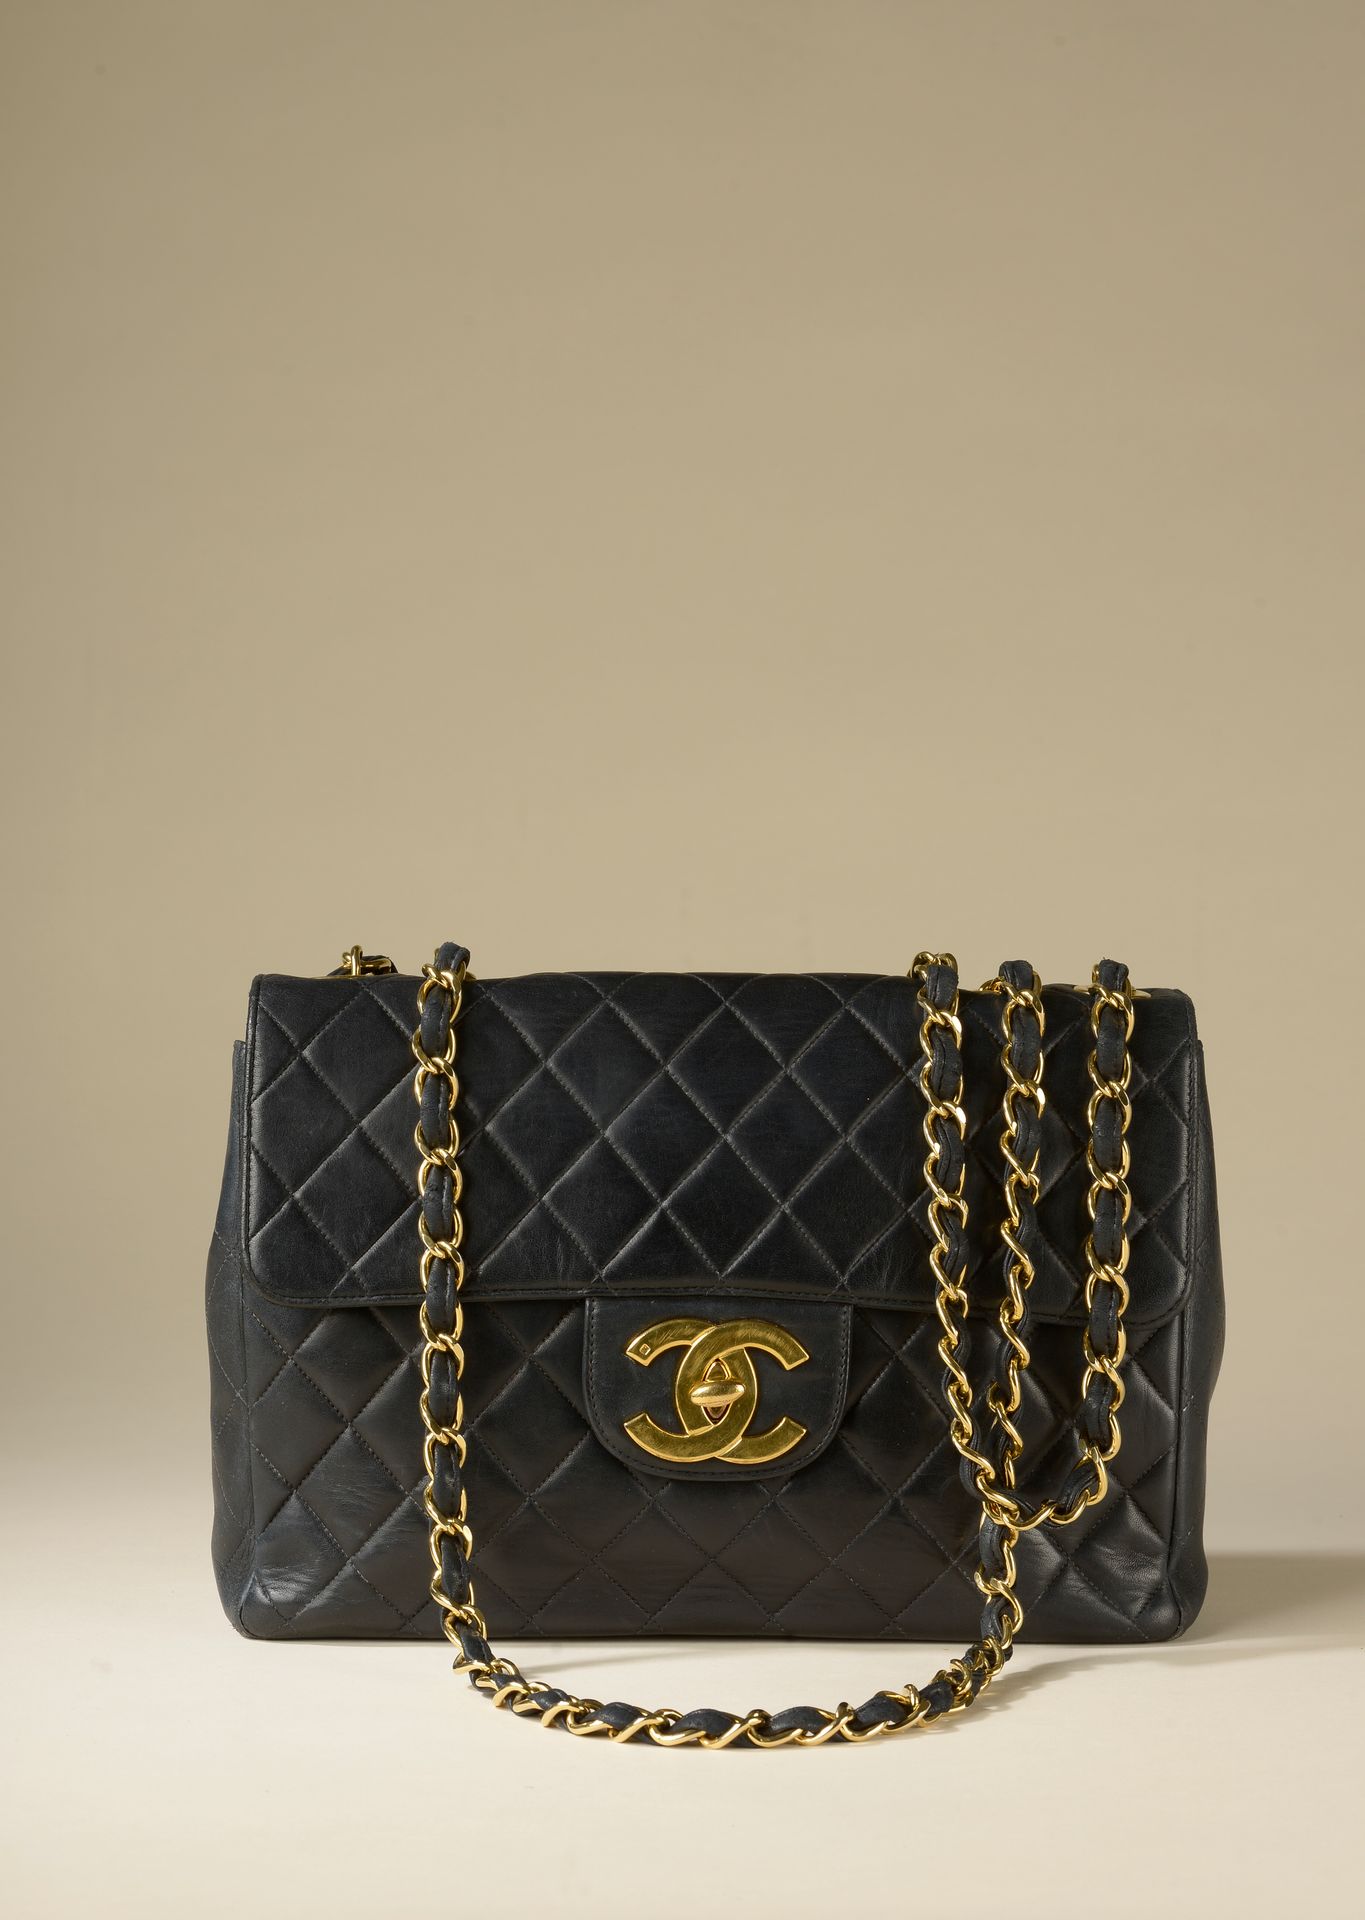 CHANEL. Jumbo bag in smooth quilted black lambskin, go…